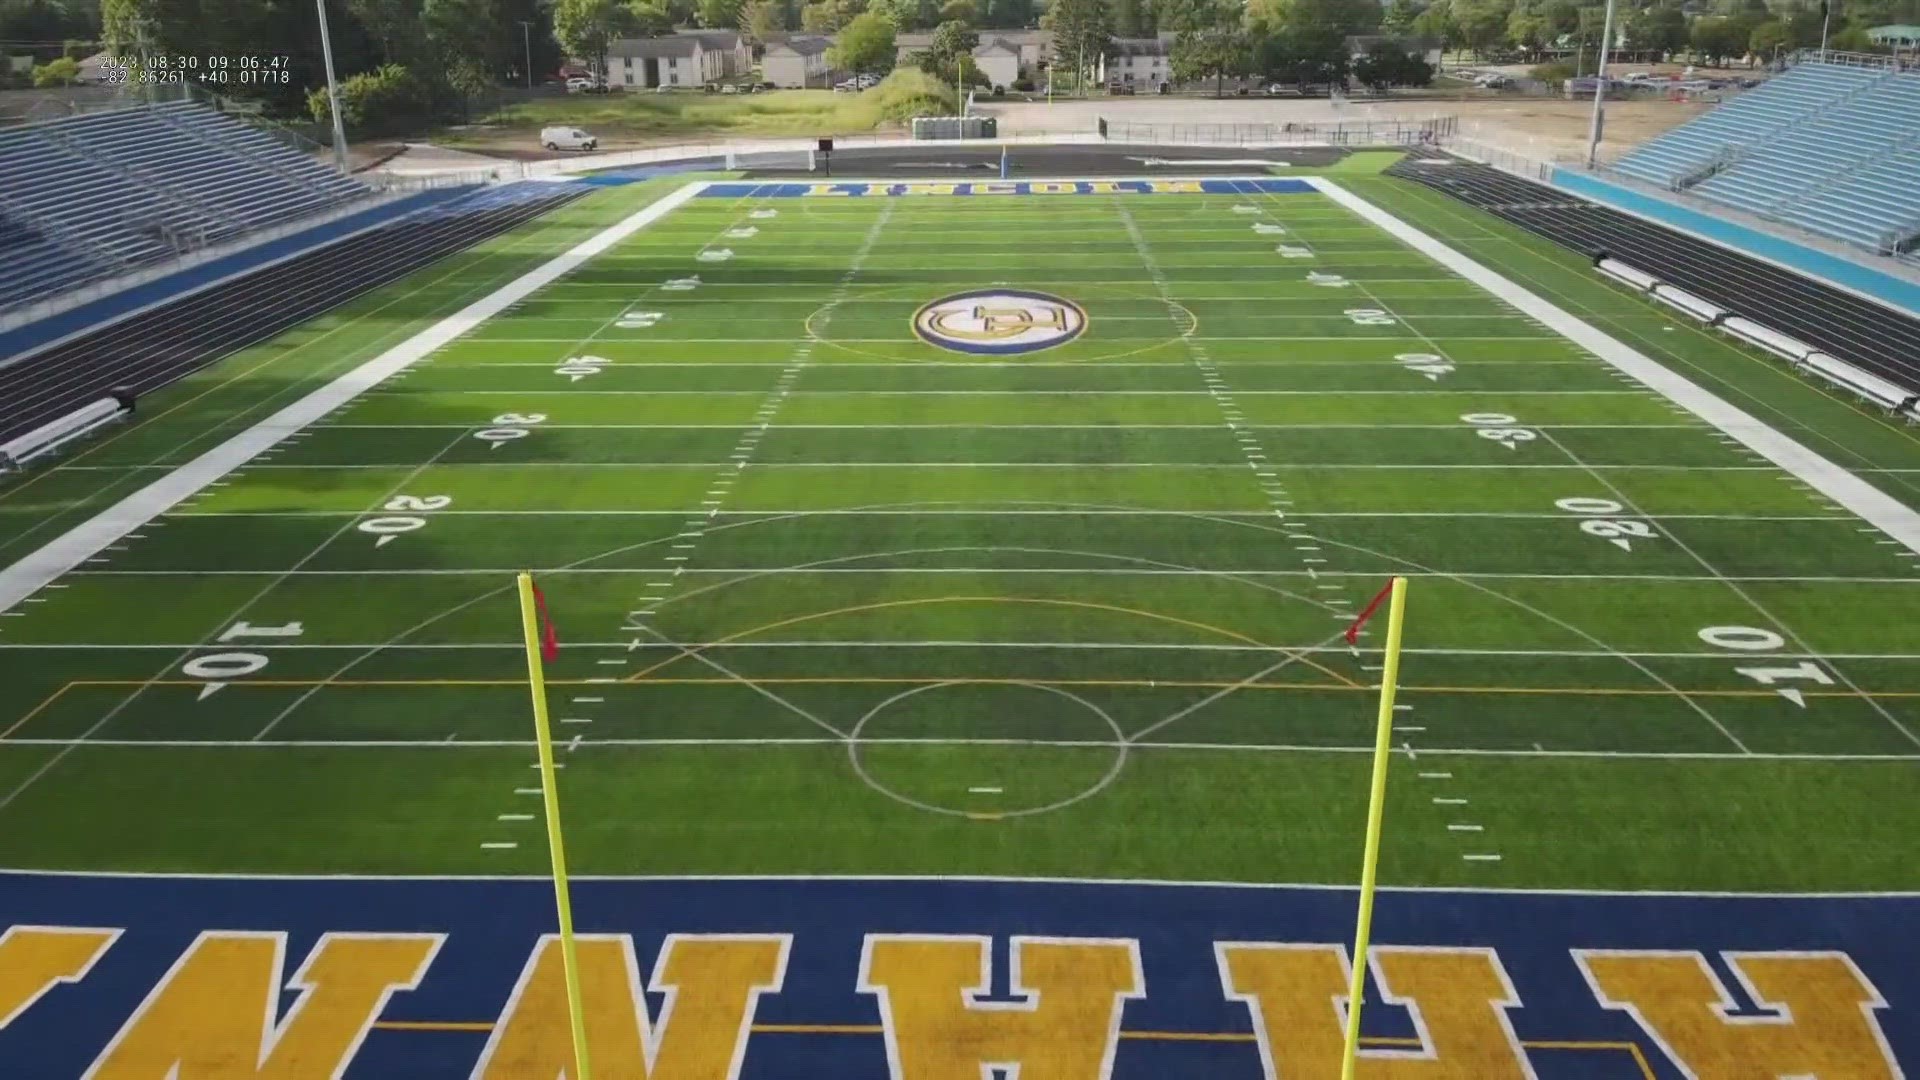 Gahanna will open their new stadium against Olentangy Liberty Friday night.